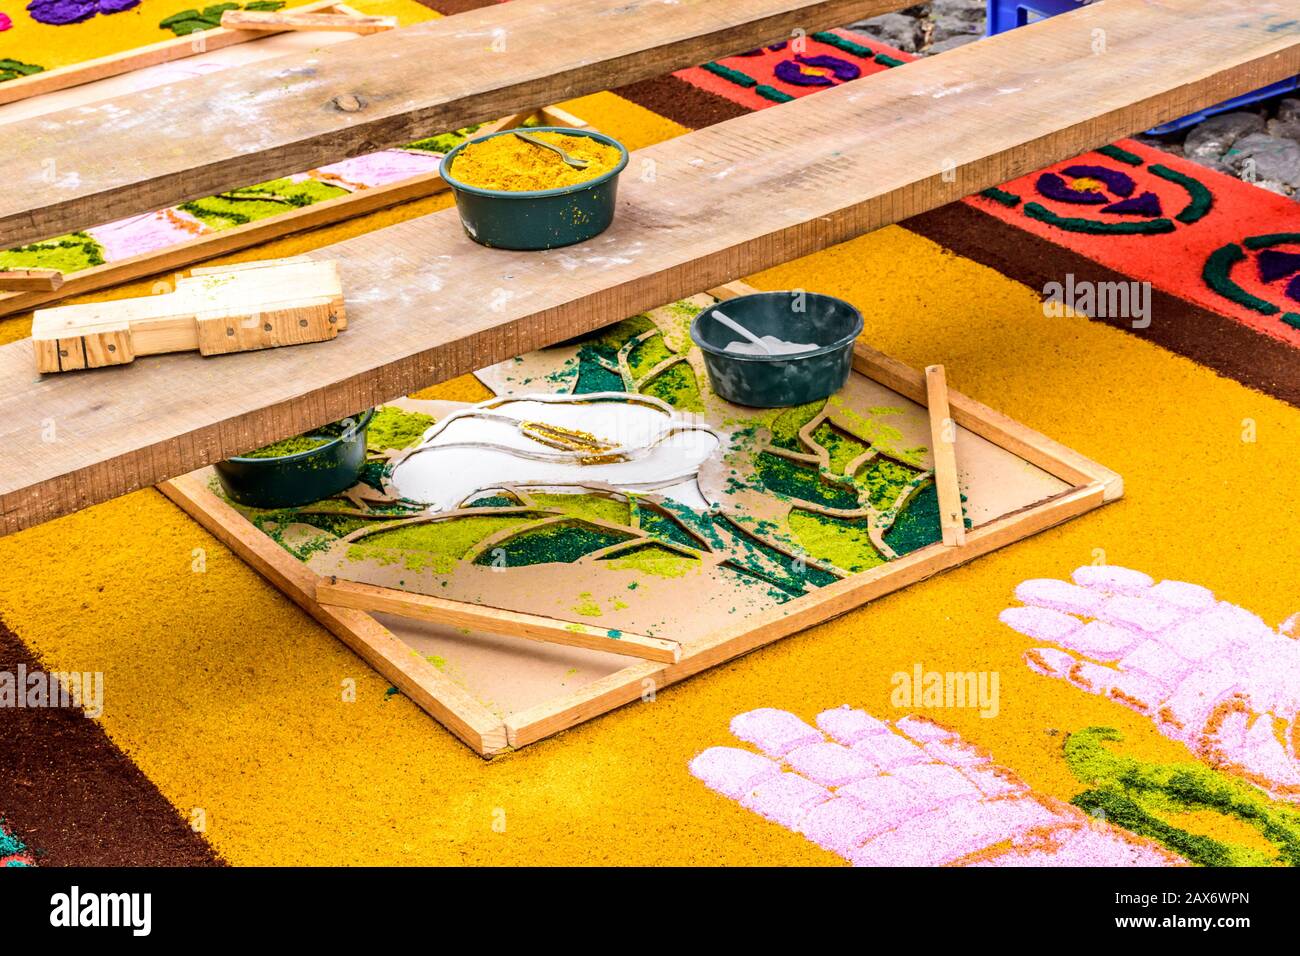 Antigua, Guatemala -  April 13, 2017: Making dyed sawdust Holy Week procession carpet in UNESCO World Heritage Site with famed Holy Week celebrations. Stock Photo